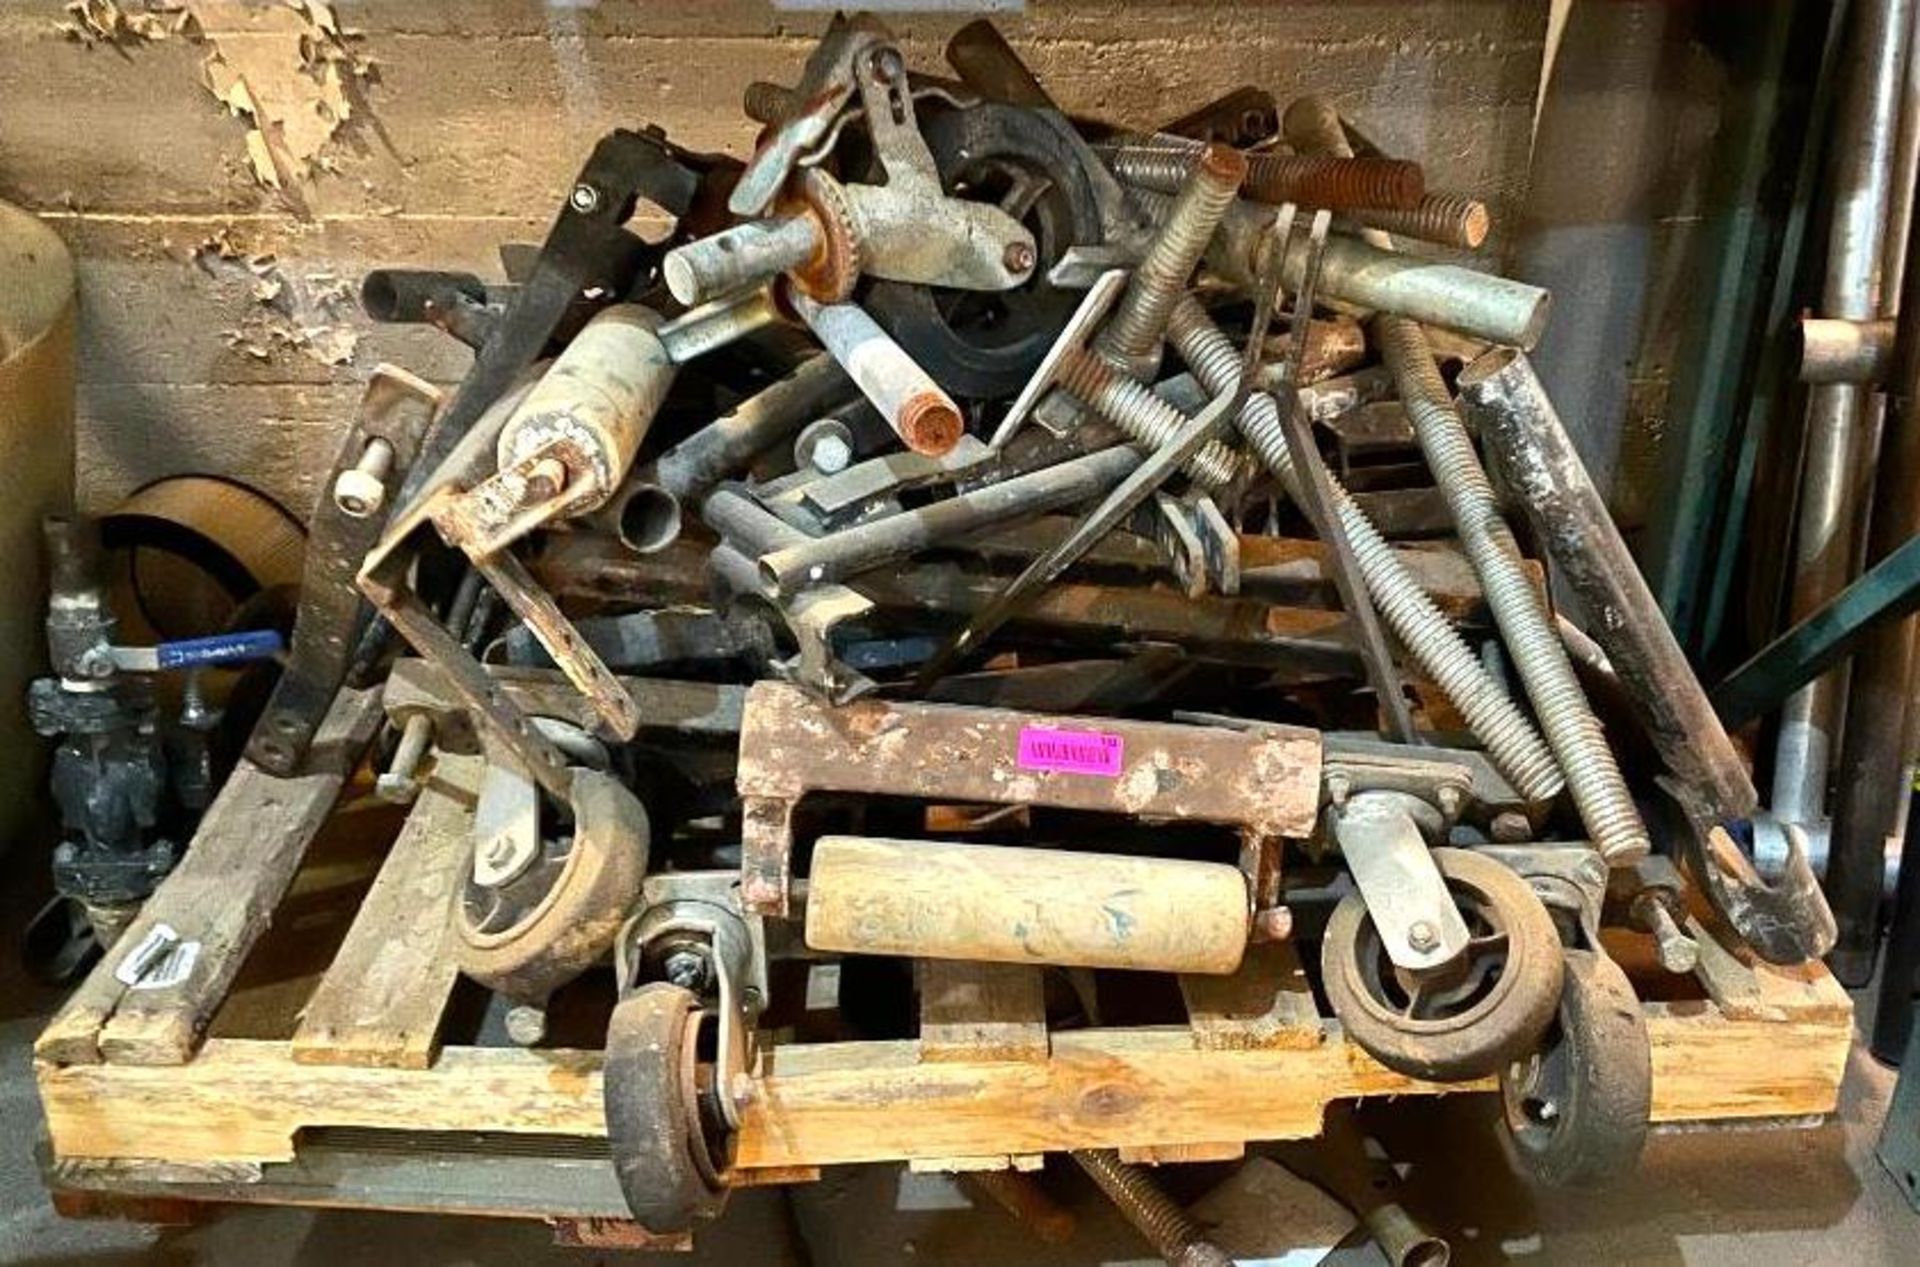 ASSORTED SCAFFOLDING CASTERS AND HARDWARE AS SHOWN LOCATION ROOM 2 QTY: 1